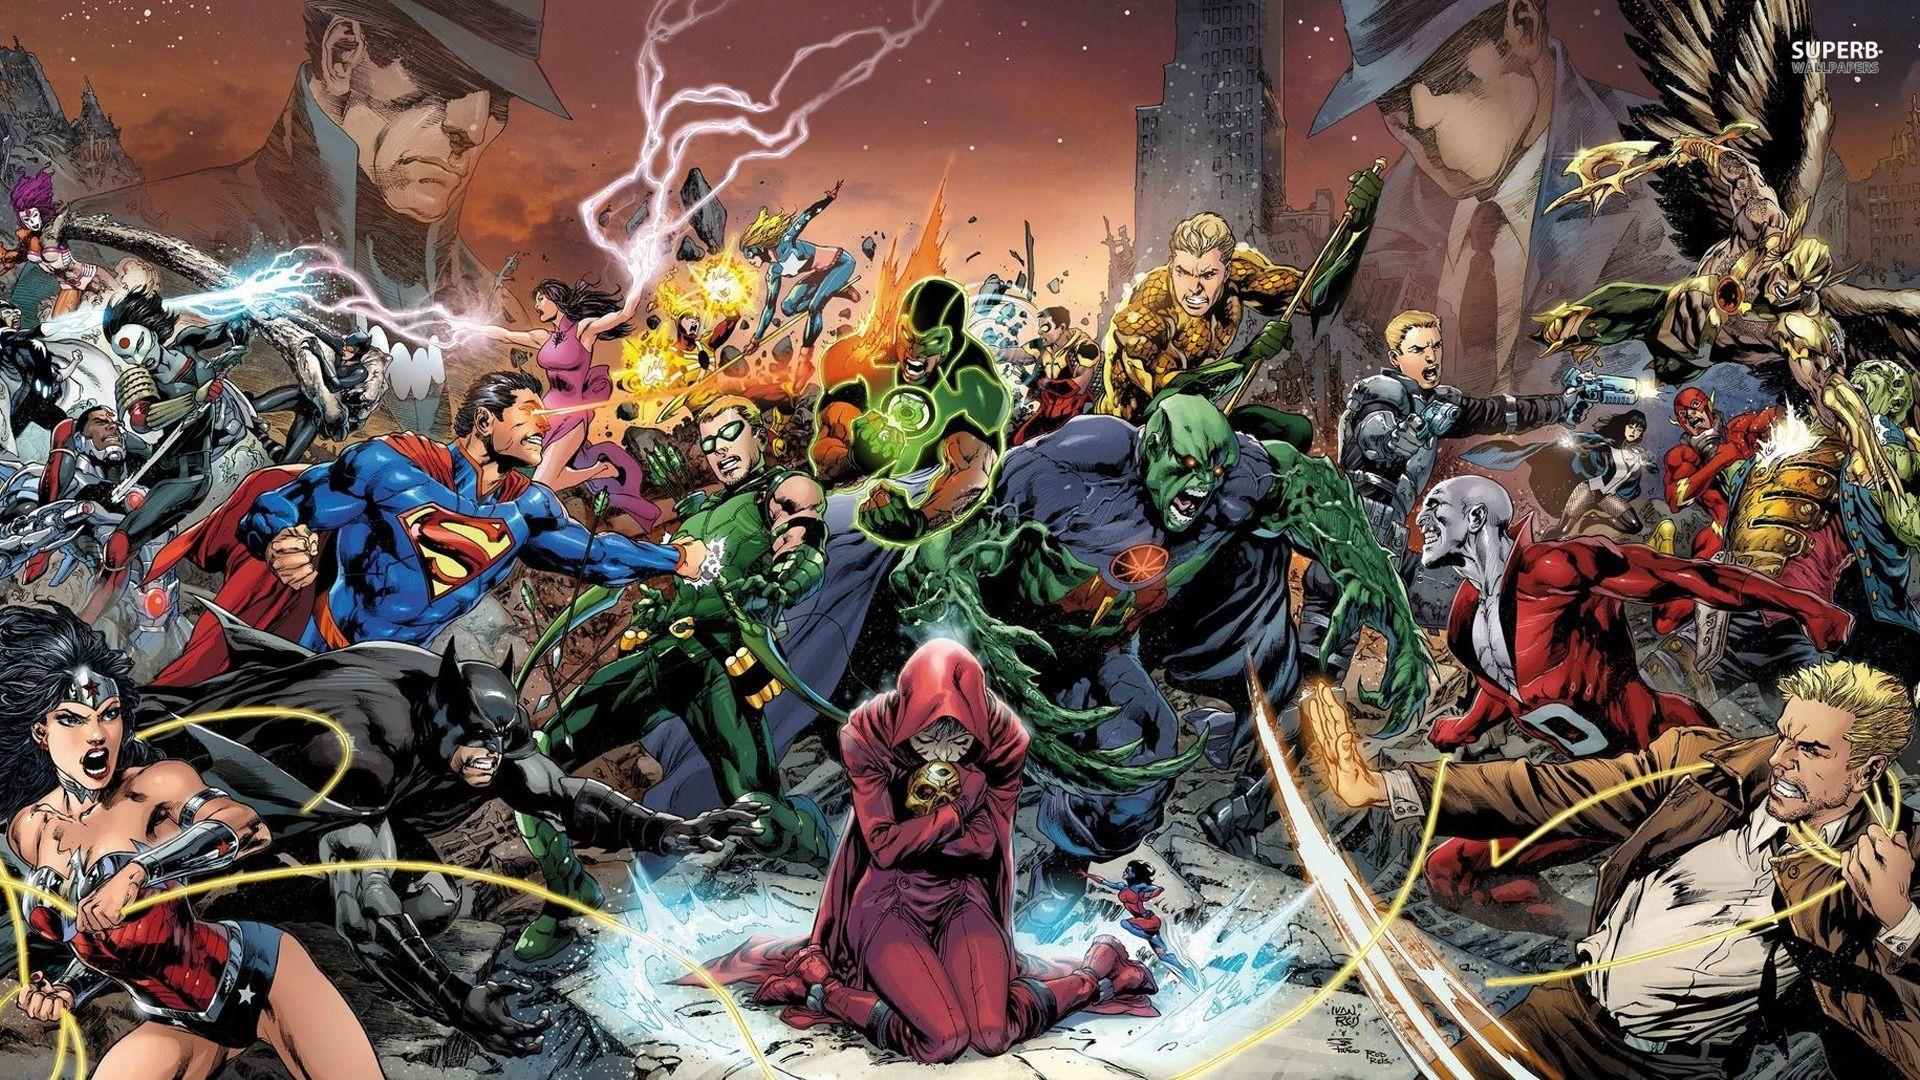 Dc Rebirth Wallpapers Top Free Dc Rebirth Backgrounds Wallpaperaccess Dc unveils rebirth designs for green arrow, supergirl and superboy. dc rebirth wallpapers top free dc